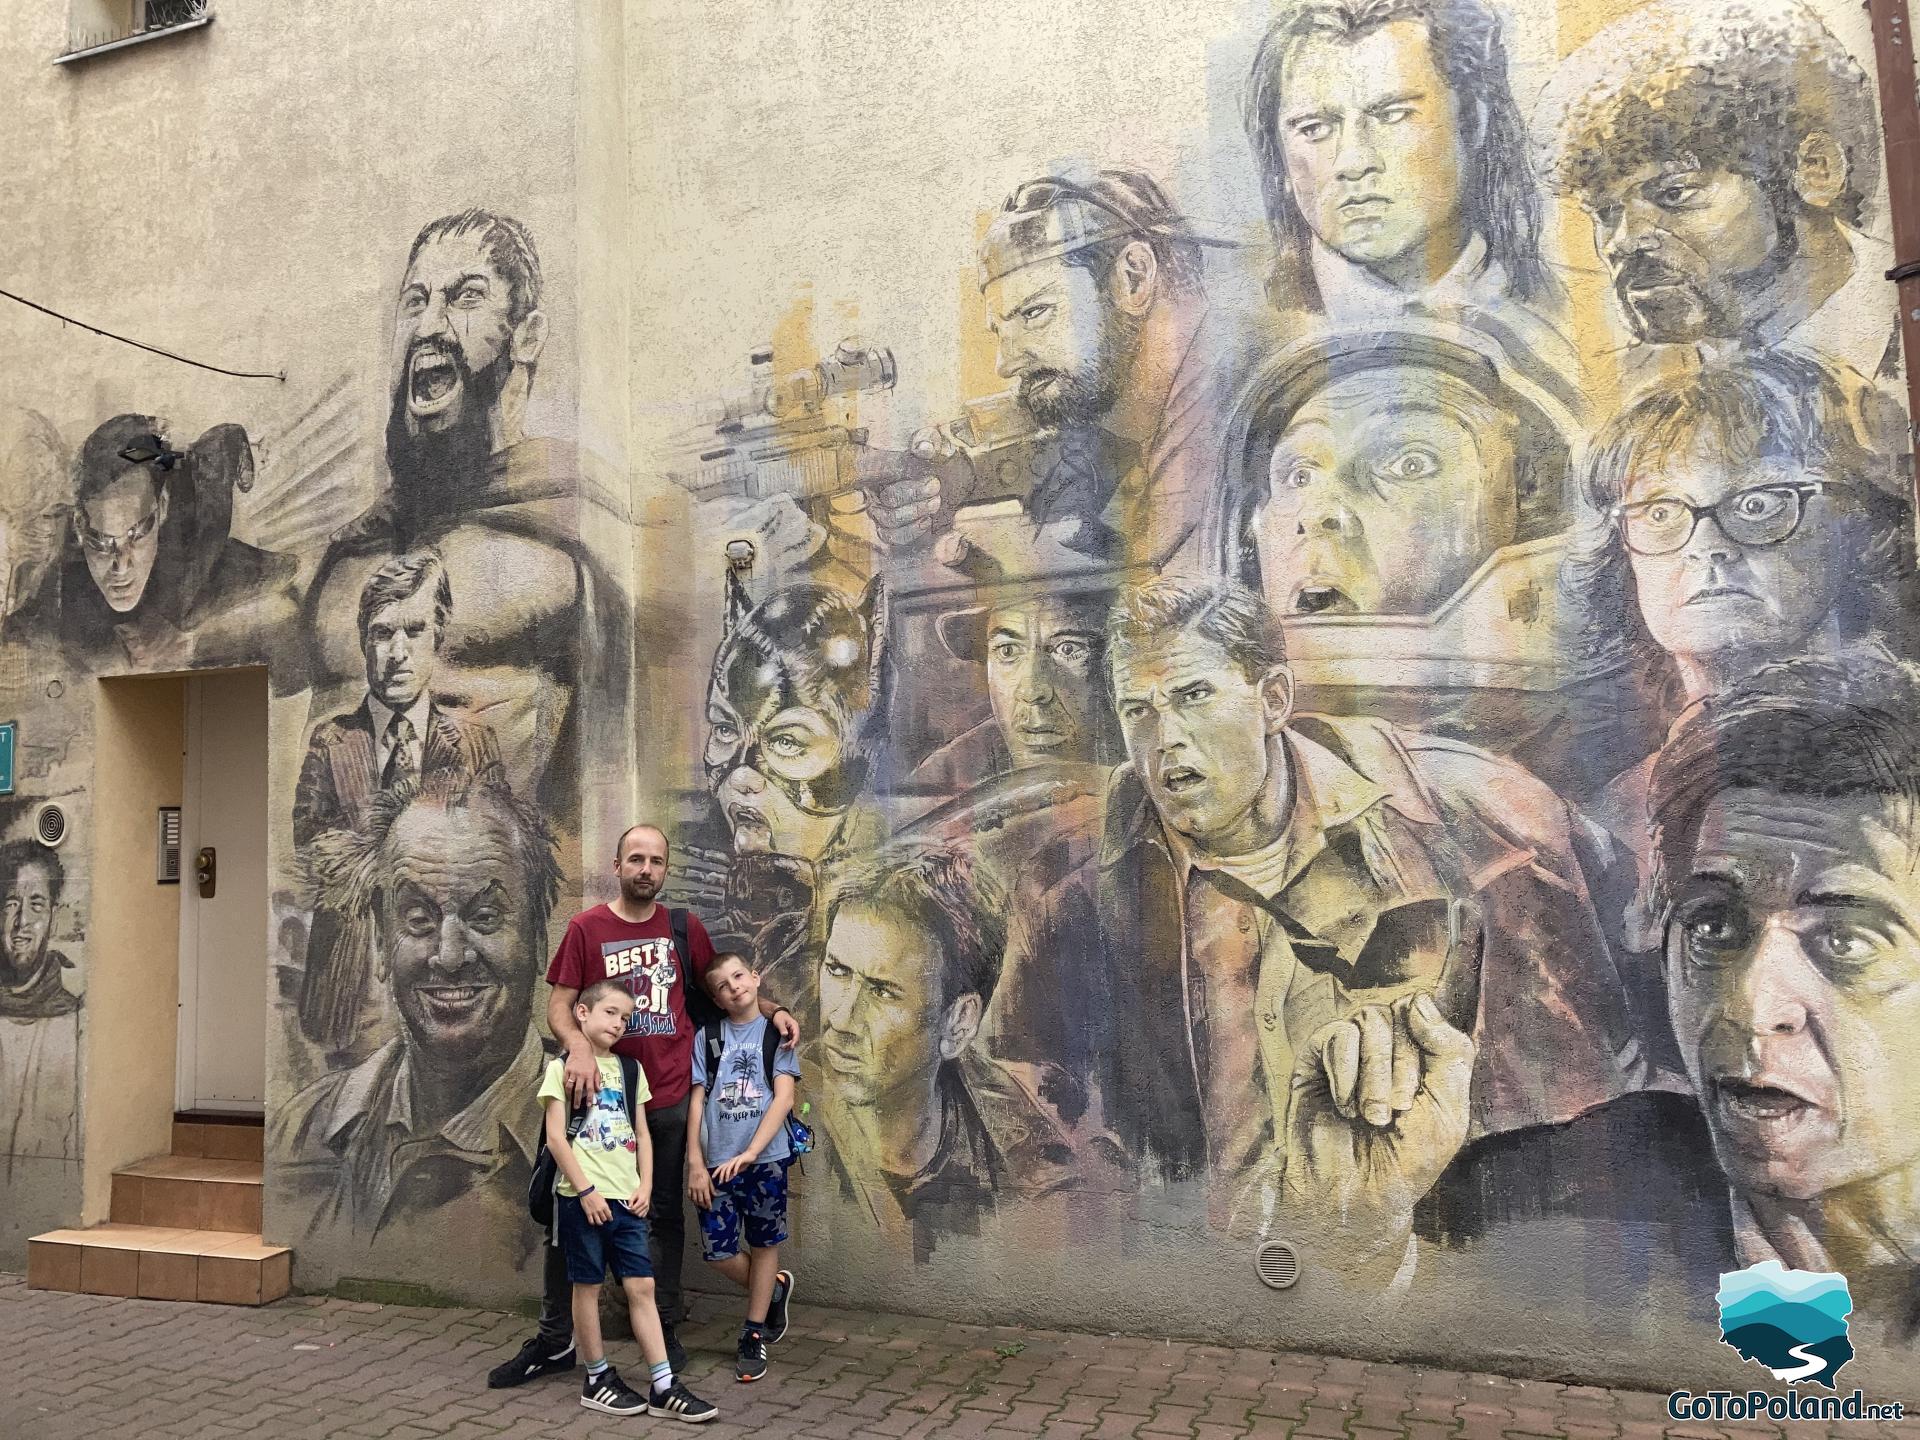 A huge mural with famous actors painted on the wall